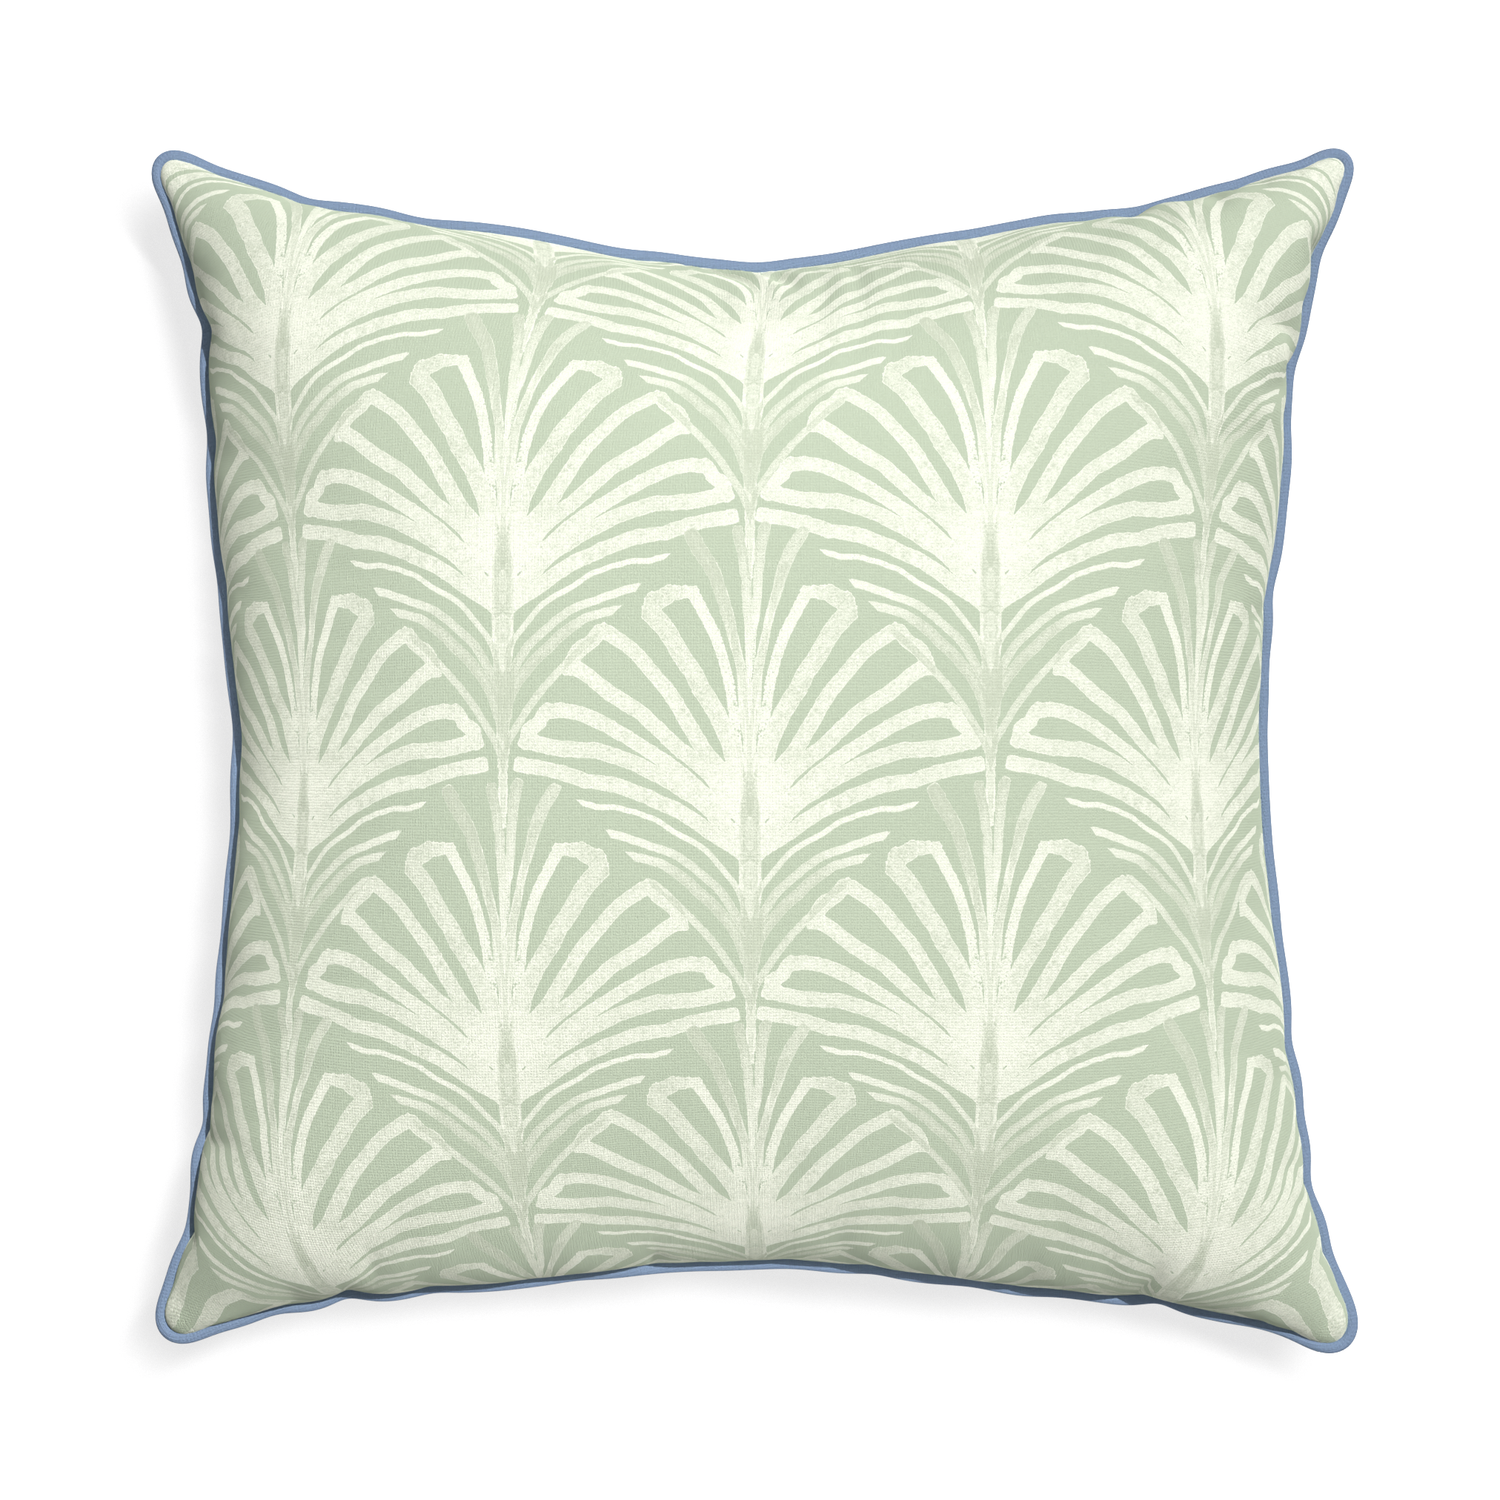 Euro-sham suzy sage custom sage green palmpillow with sky piping on white background